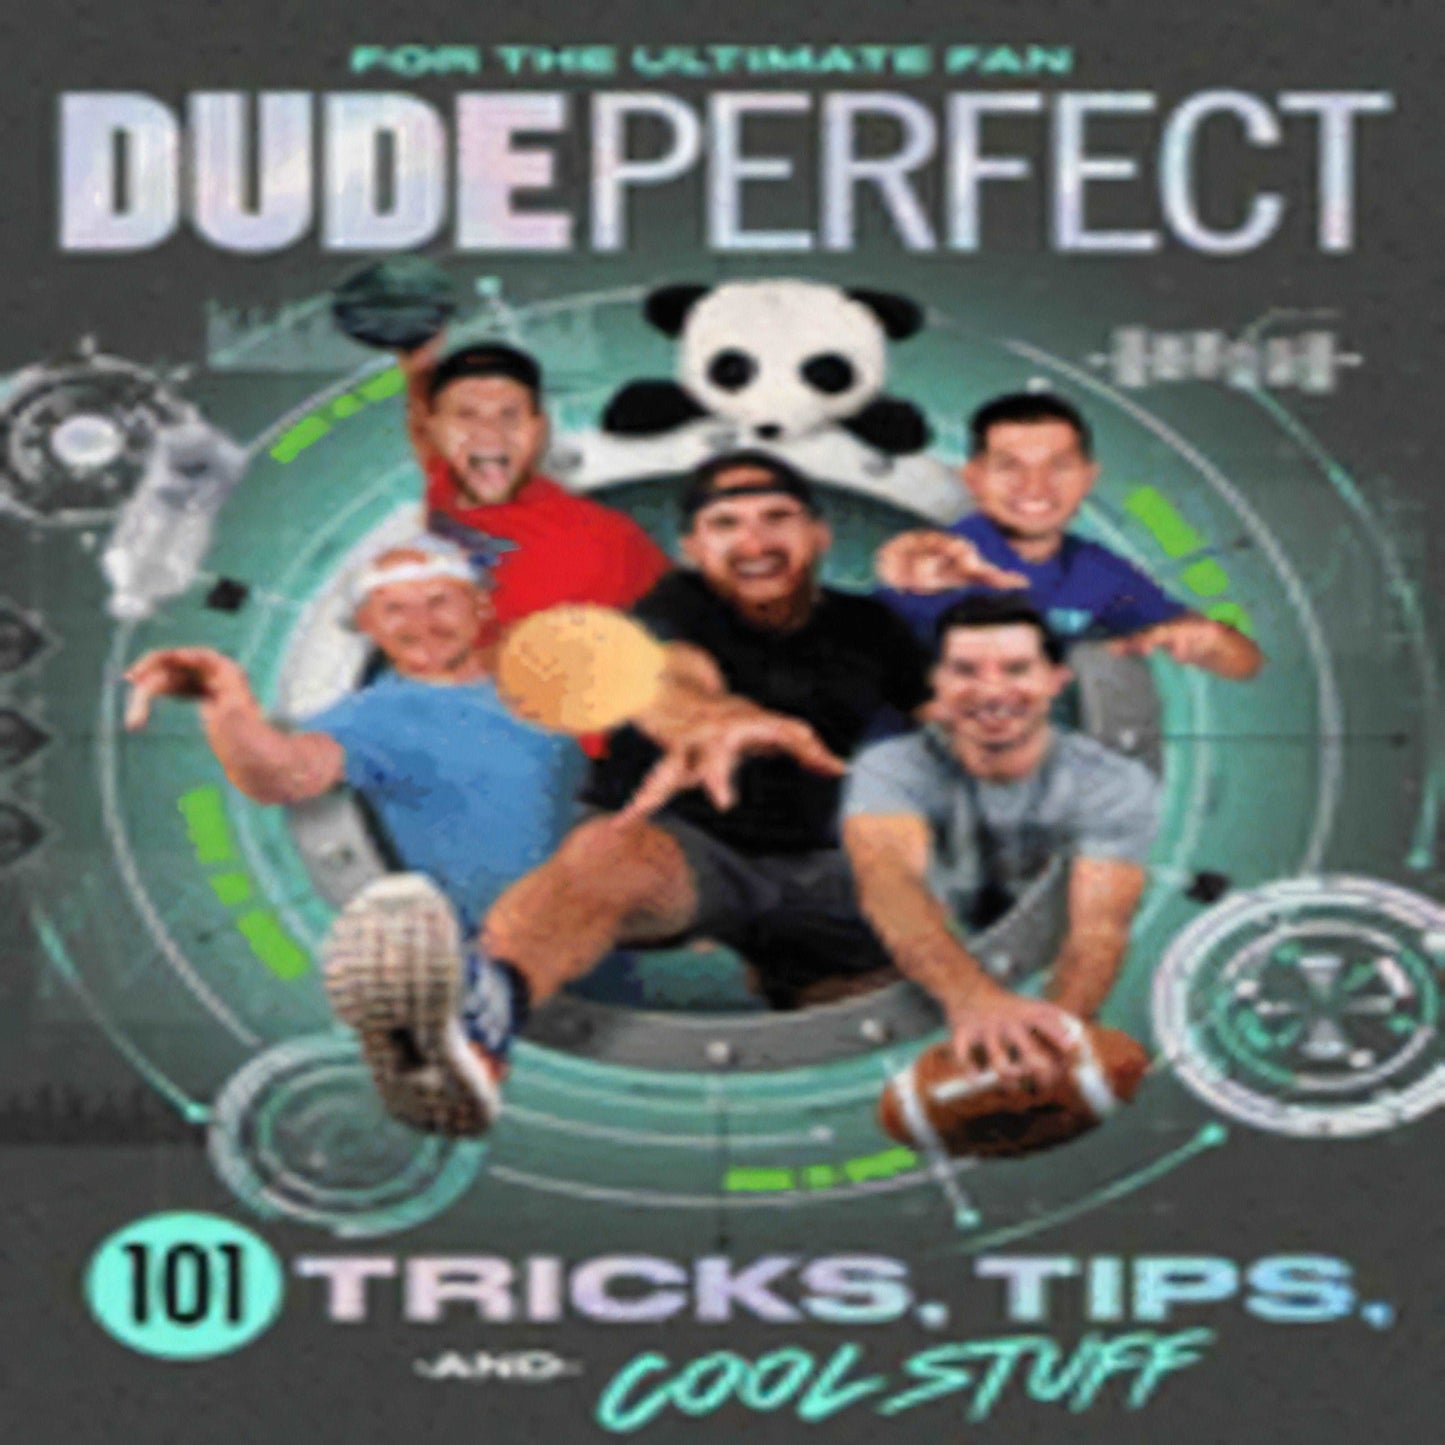 Dude Perfect 101 Tricks, Tips, and Cool Stuff257-031823-1400217075DPGBOOKSTORE.COM. Today's Bestsellers.